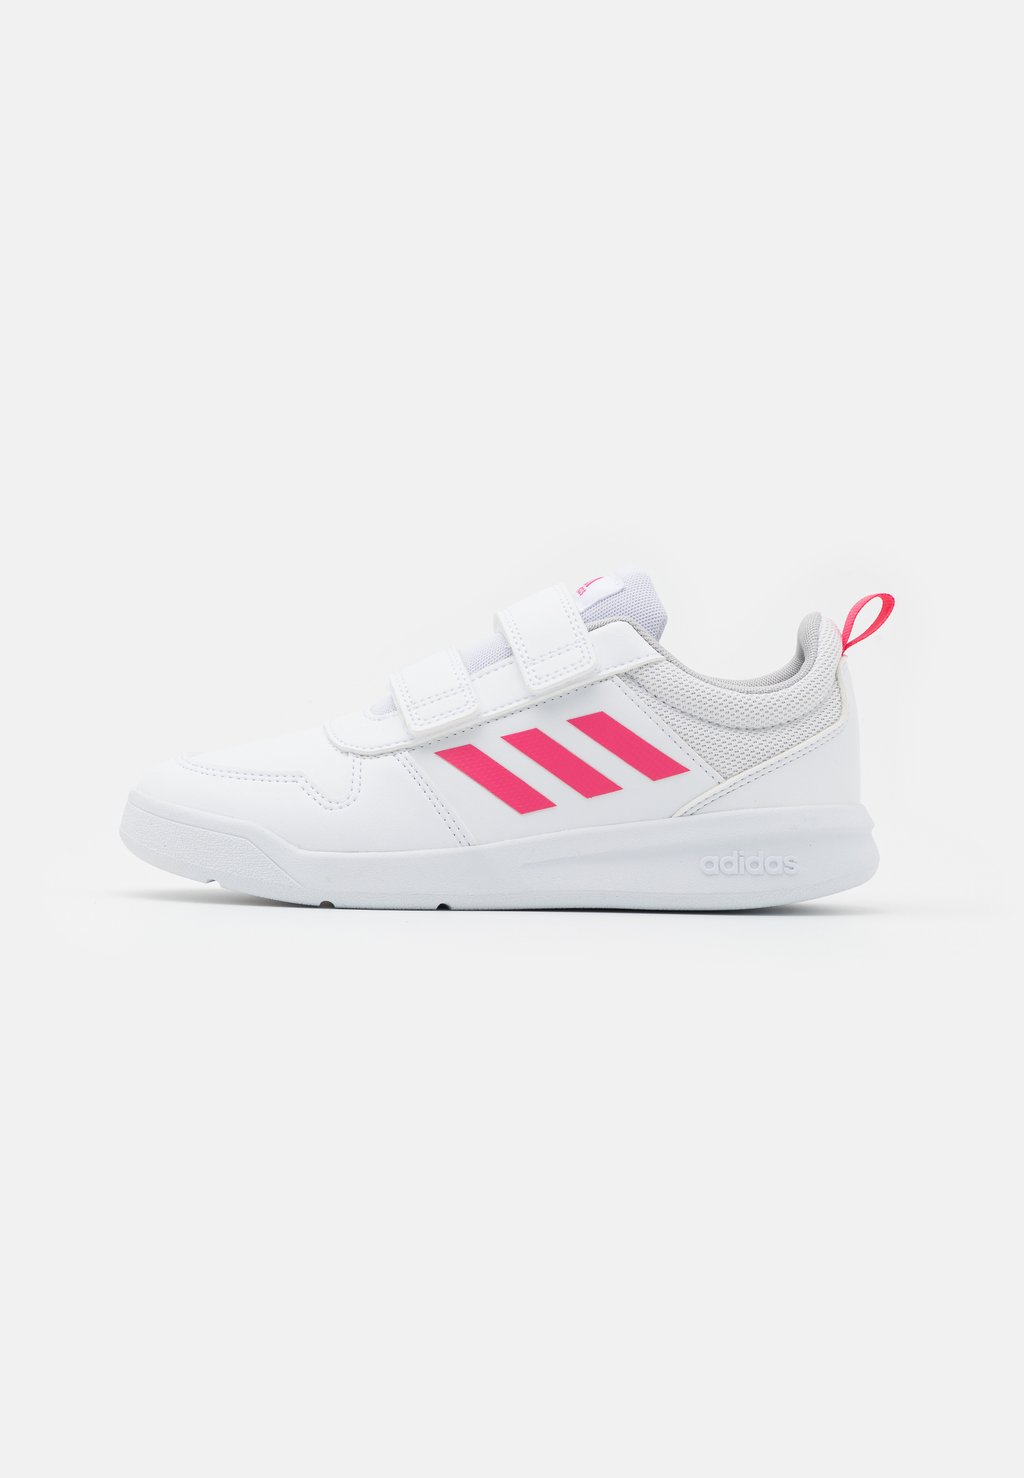 Кроссовки TENSAUR UNISEX adidas Performance, цвет footwear white/real pink annymoli woman mary janes shoes real leather med heels flower square toe pumps buckle thick heel ladies footwear pink white 40